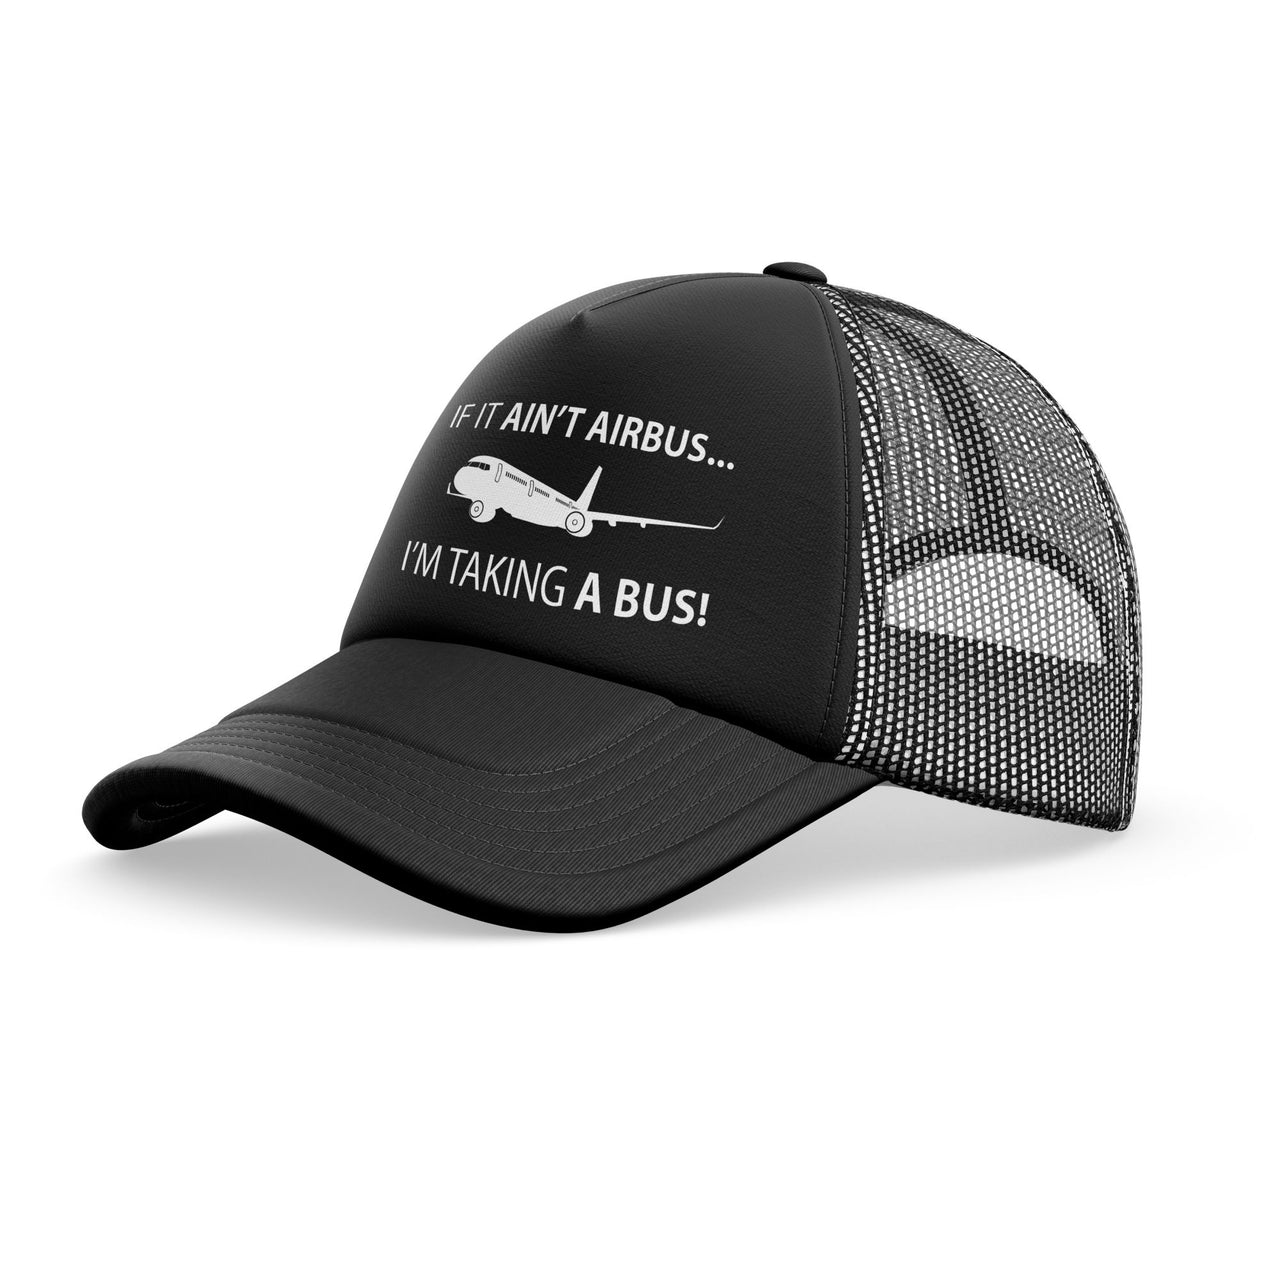 If It Ain't Airbus I'm Taking A Bus Designed Trucker Caps & Hats